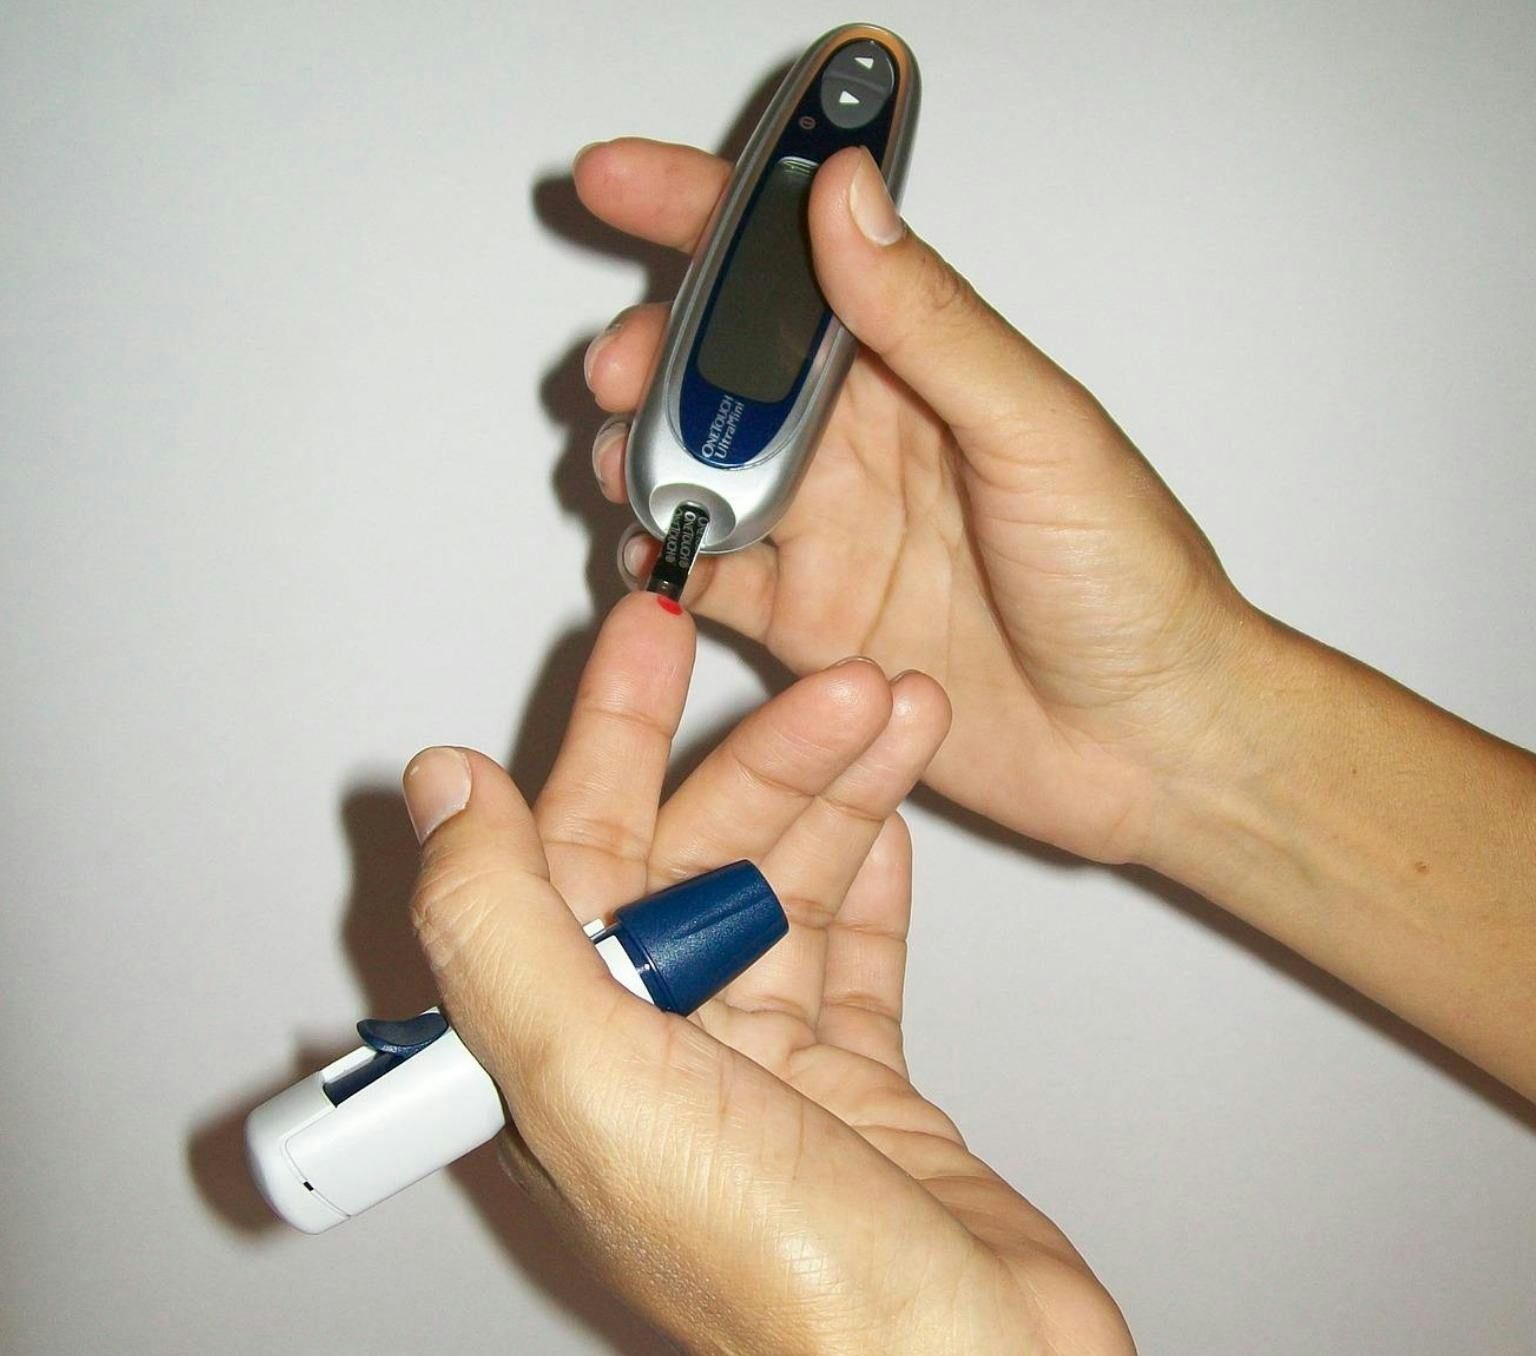 Close up of a person's hands holding a glucose monitor to their index finger to test their blood sugar.